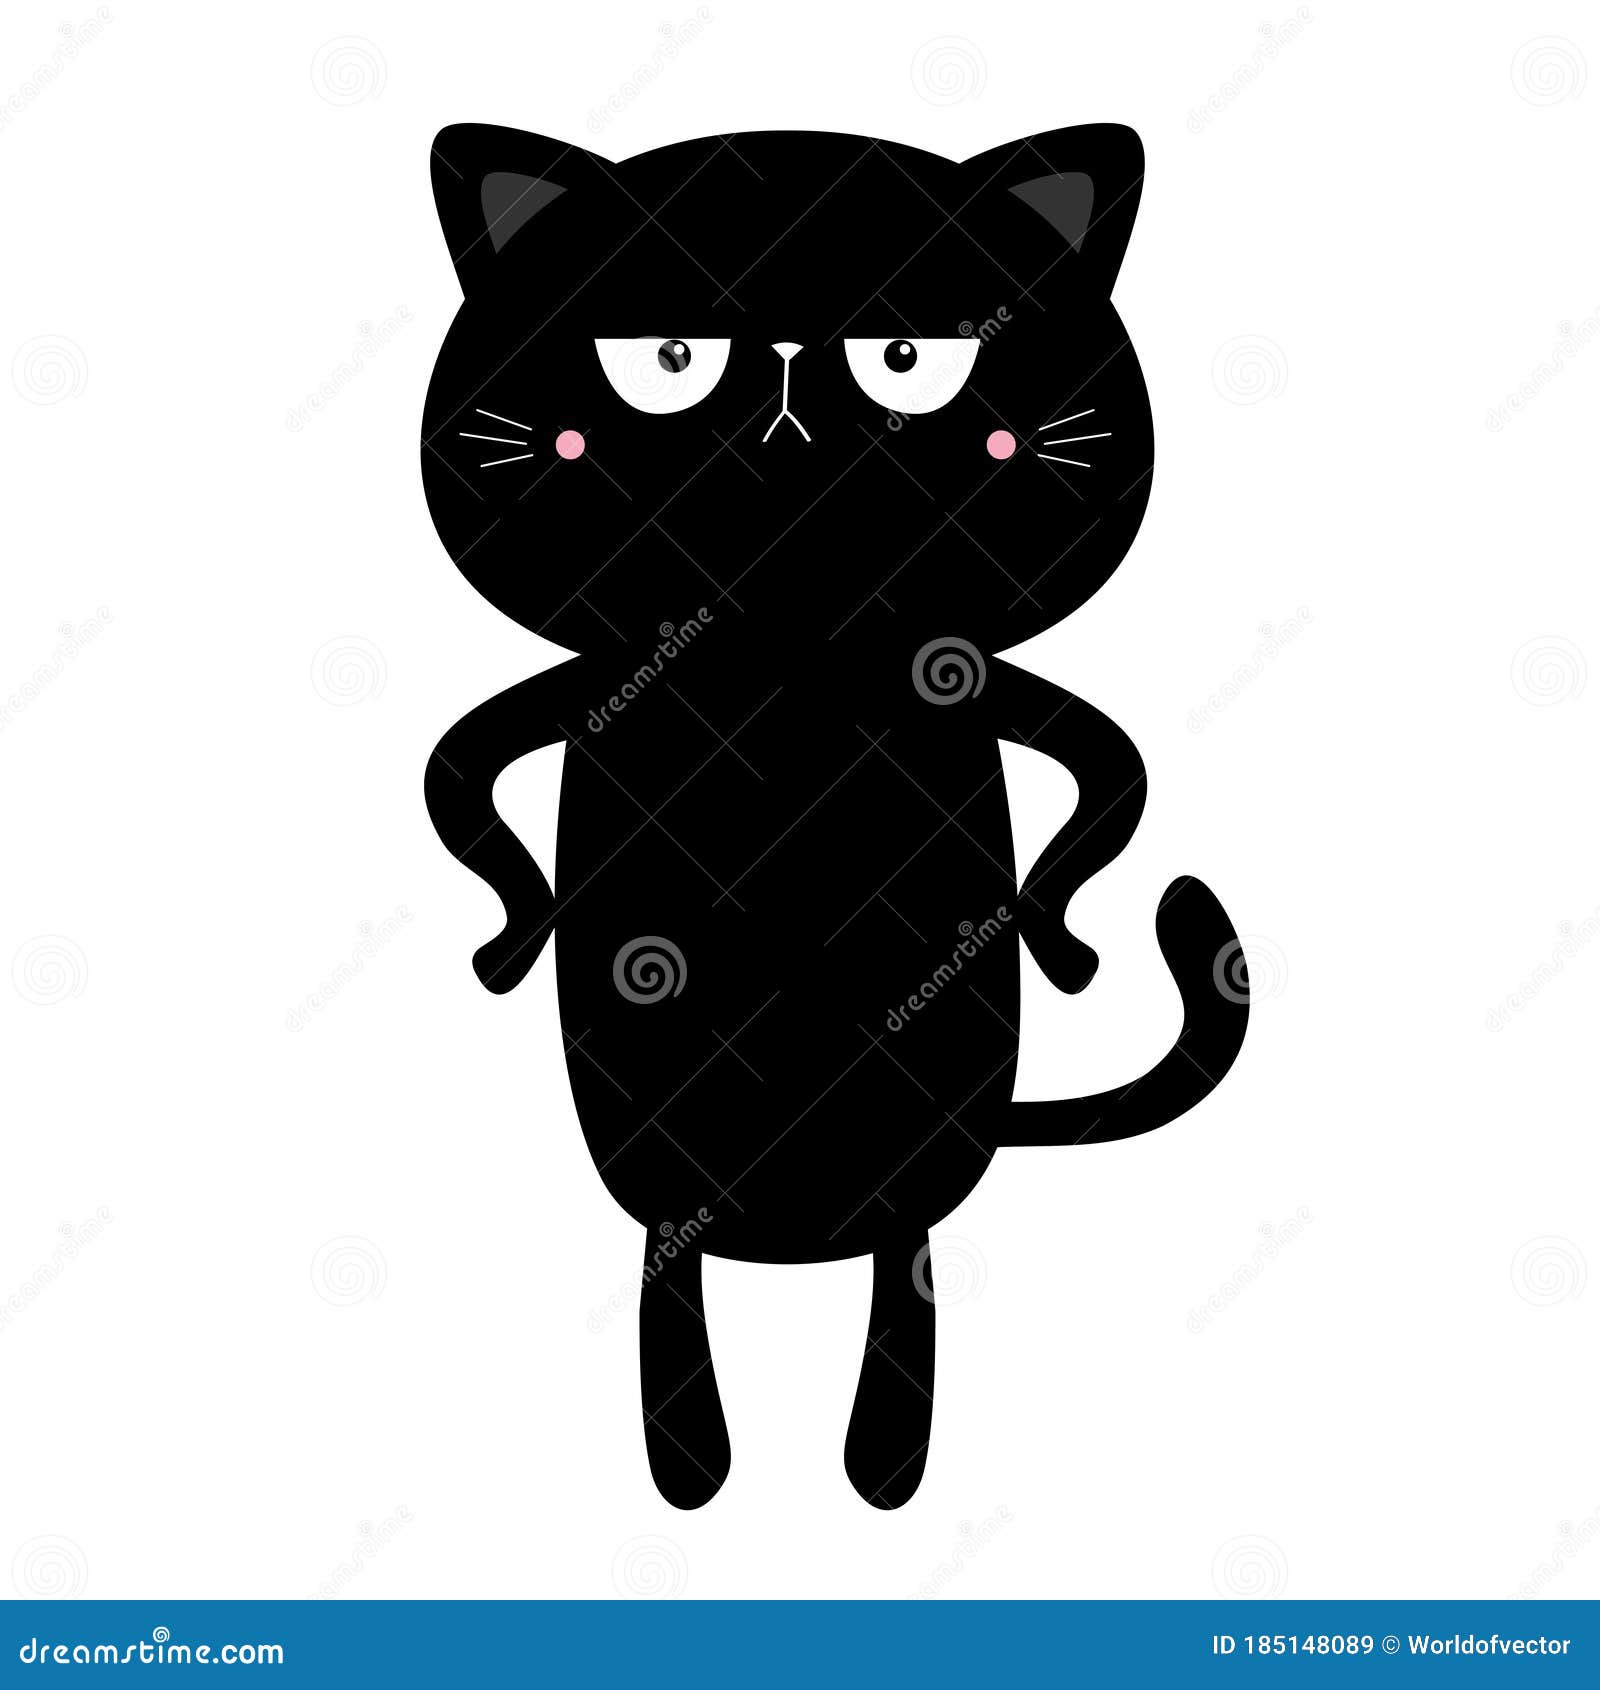 Black White contour Cat head couple family icon. Red heart. Cute funny  cartoon character. Word love Valentines day Greeting card. Kitty Whisker  Baby pet collection background. Isolated. Flat design. Stock Vector